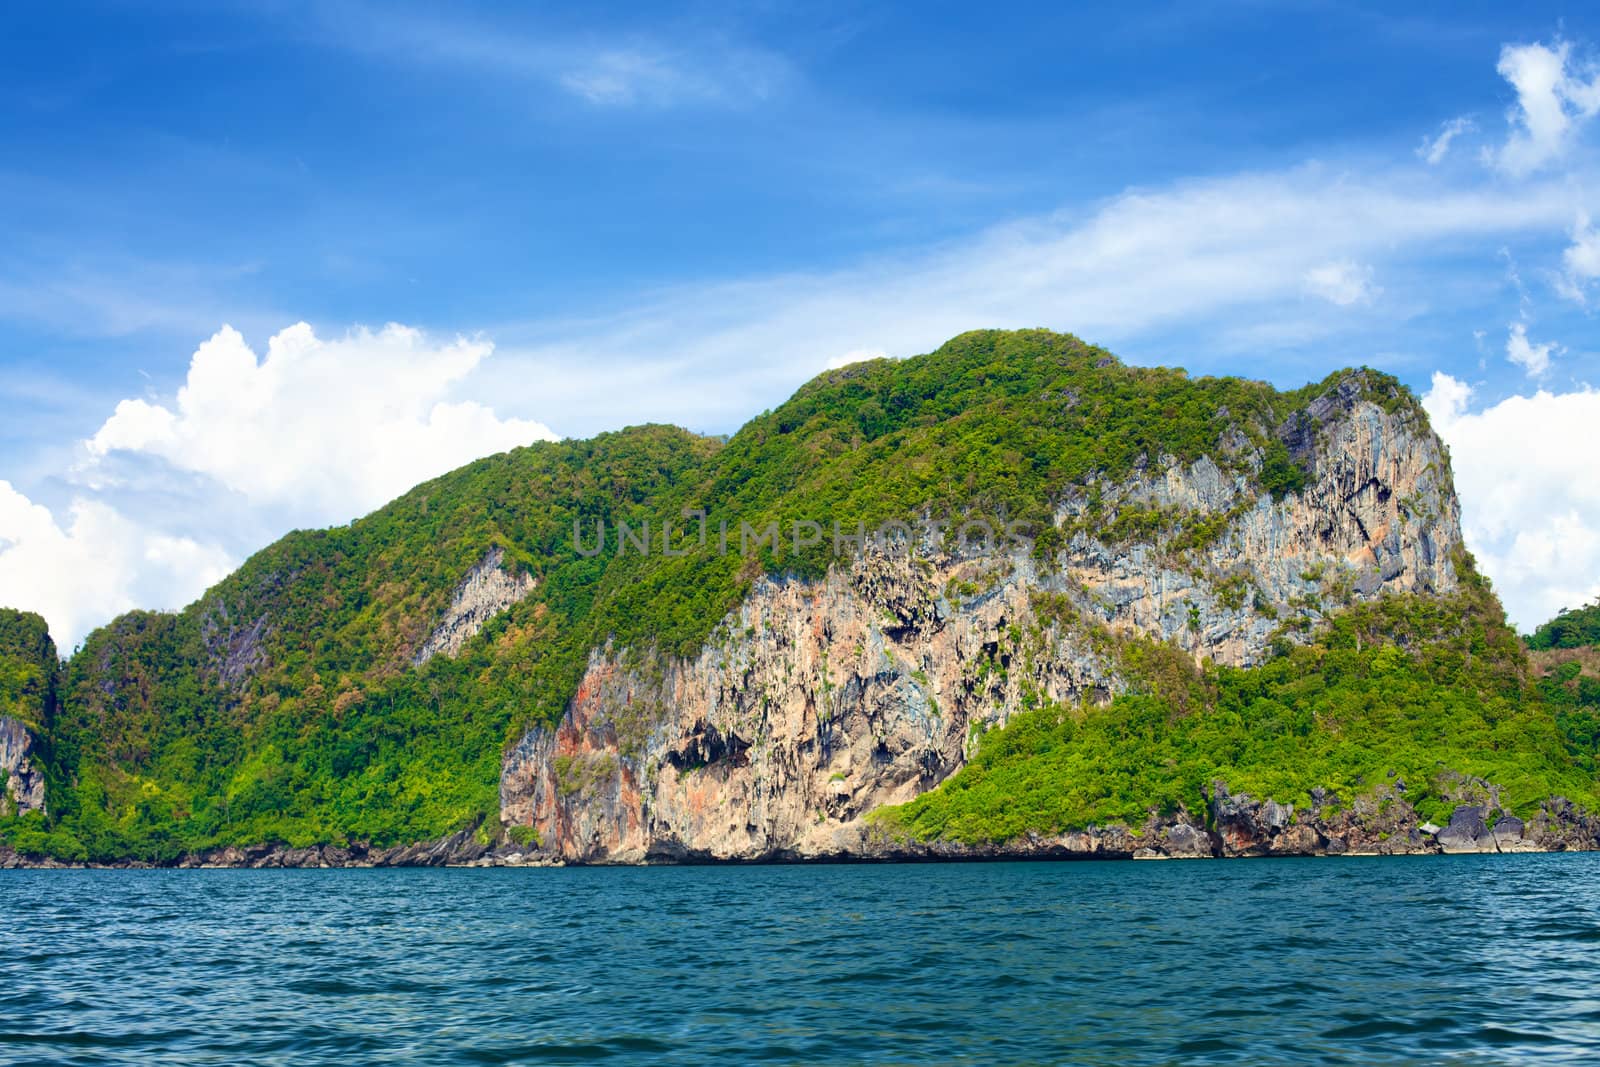 tall cliff with trees at Andaman Sea, Thailand